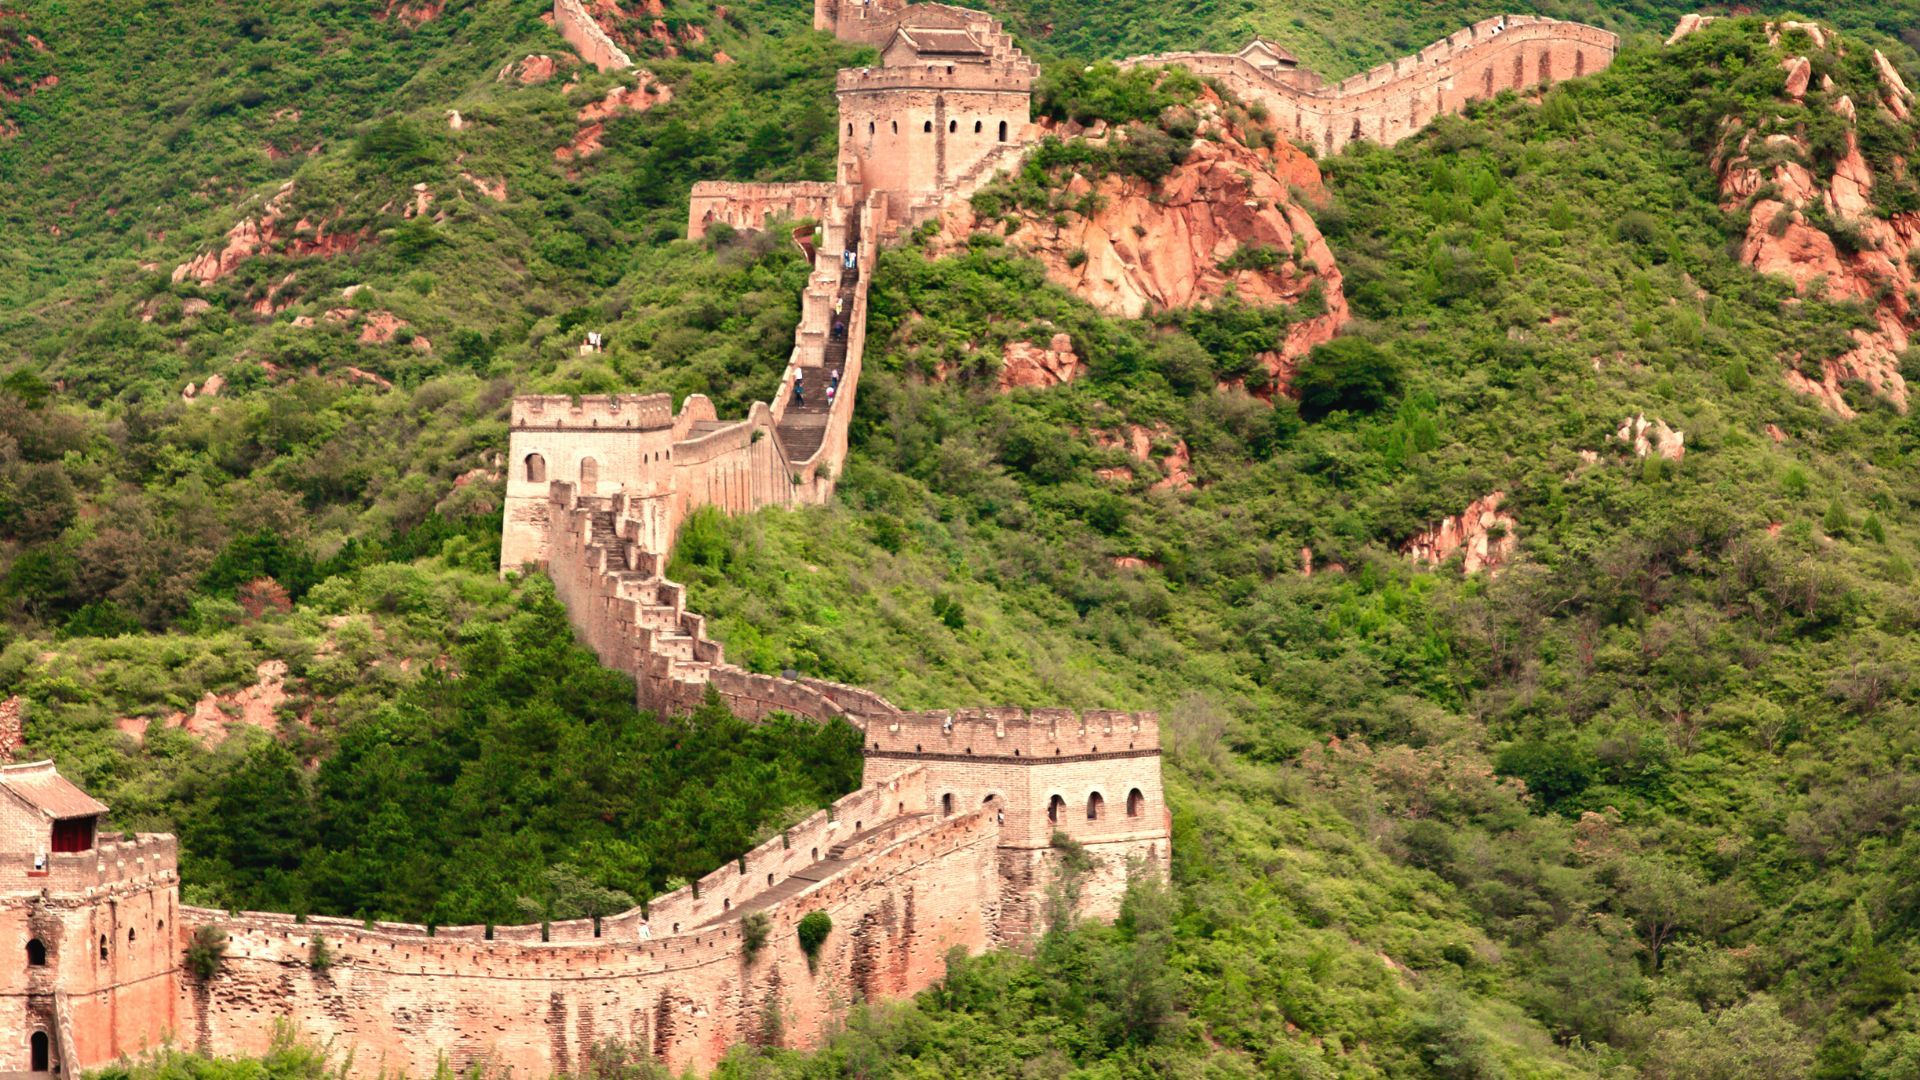 essay on great wall of china